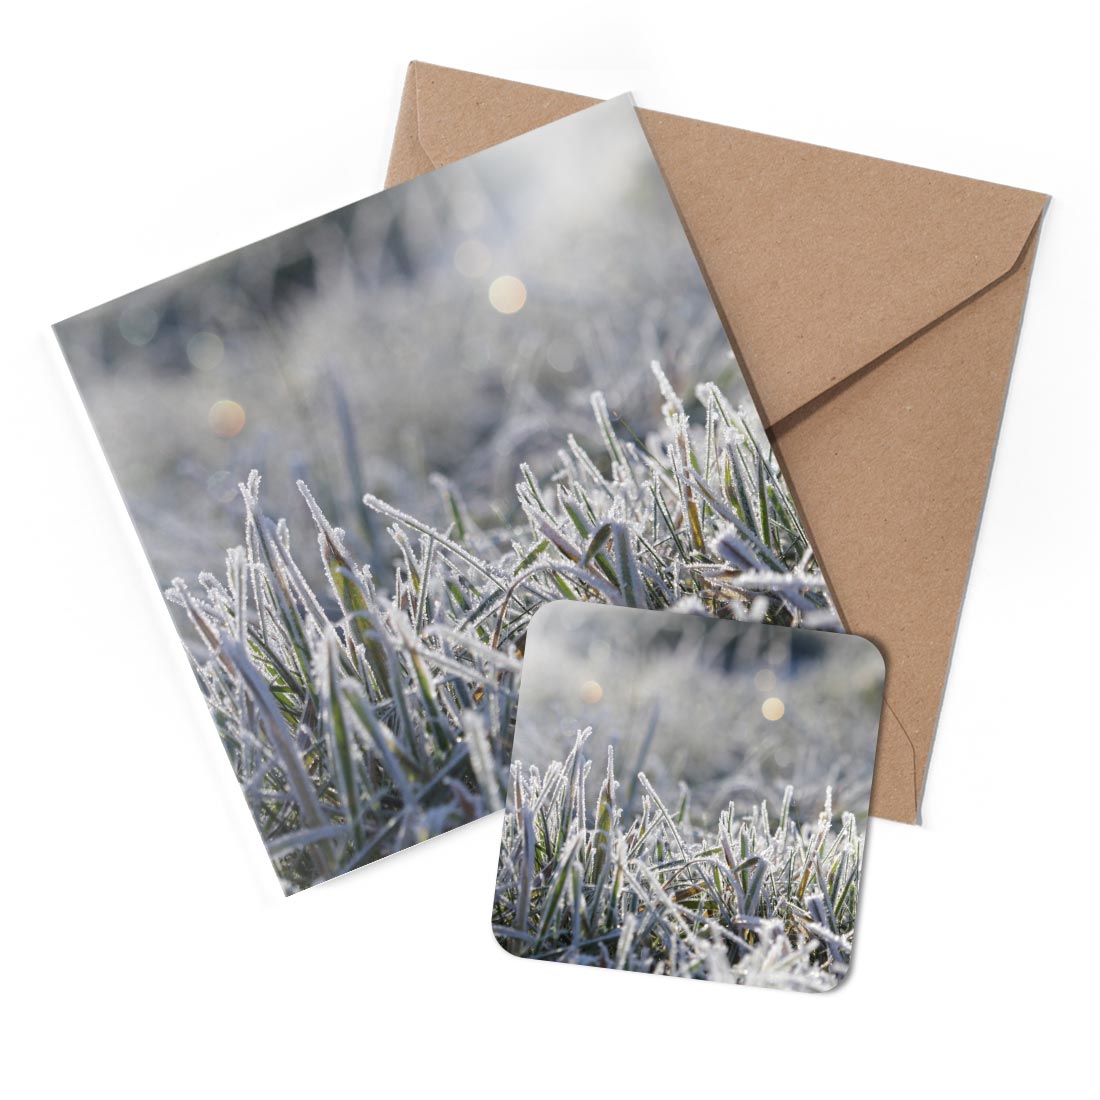 1 x Greeting Card & Coaster Set - Frosted Grass Winter Nature #50950